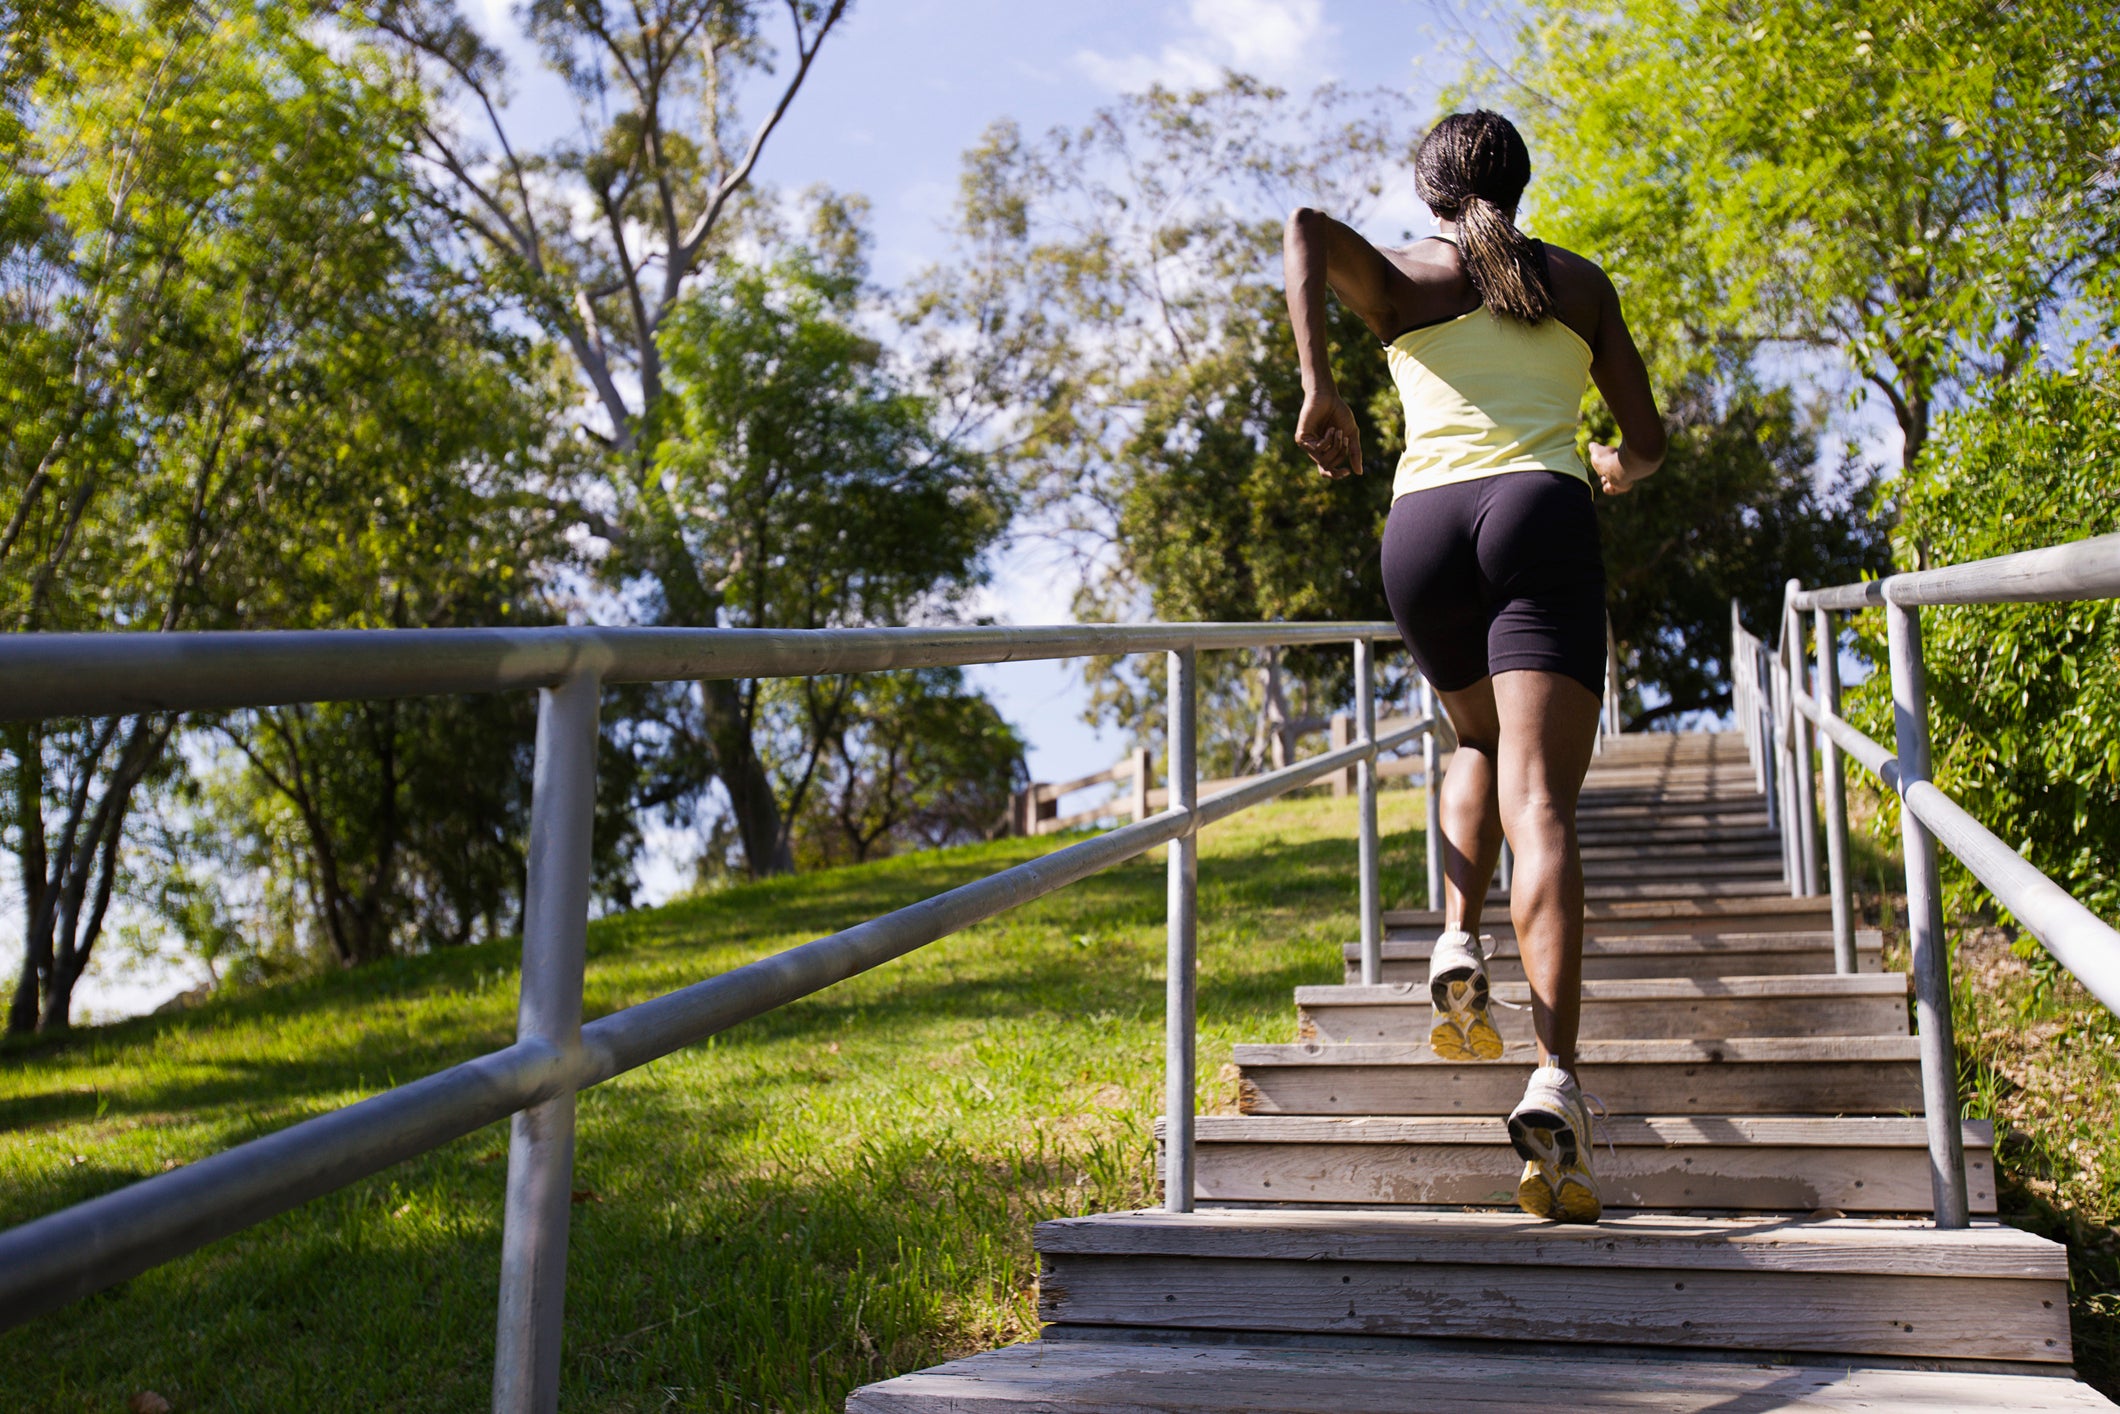 Experts Weigh In On How To (Safely) Make The Most Of Outdoor Workouts